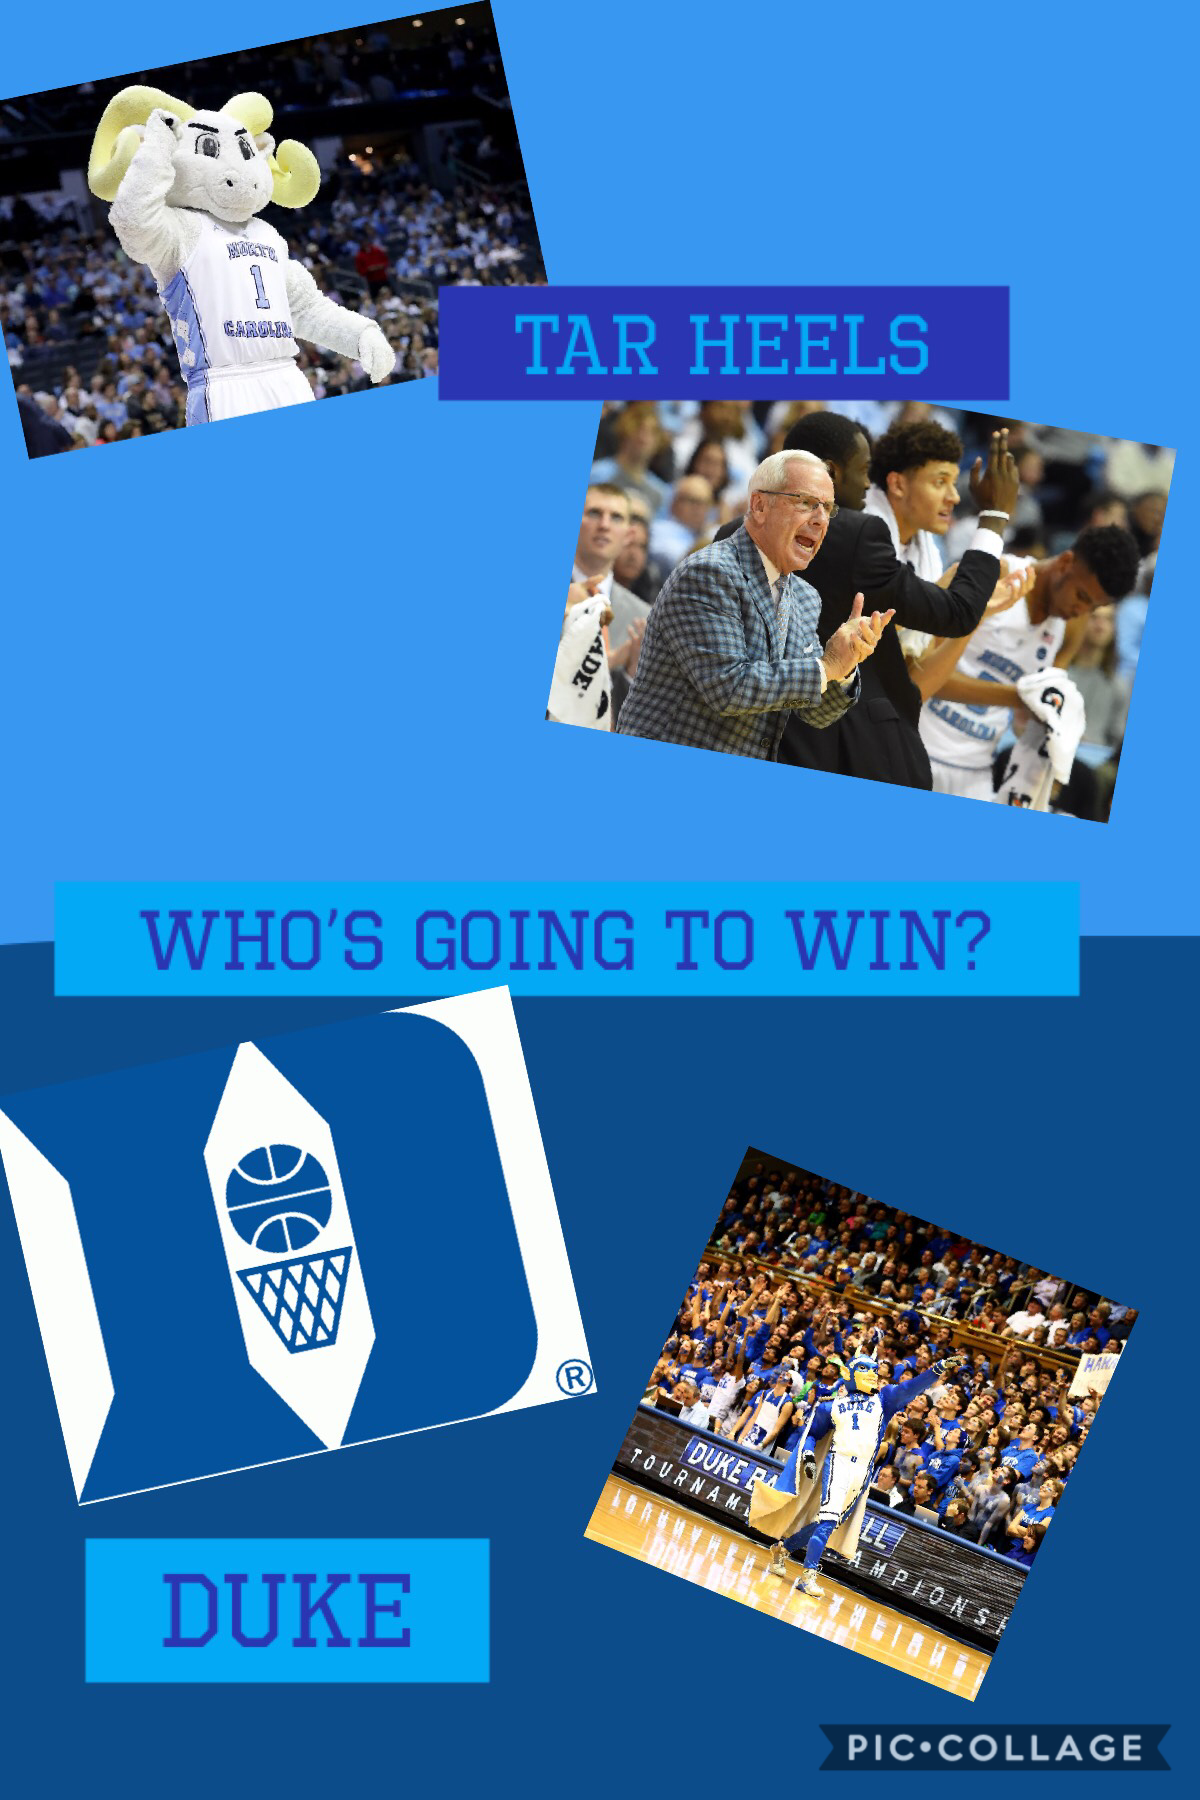 Who thinks the Tar Heels are going to win?